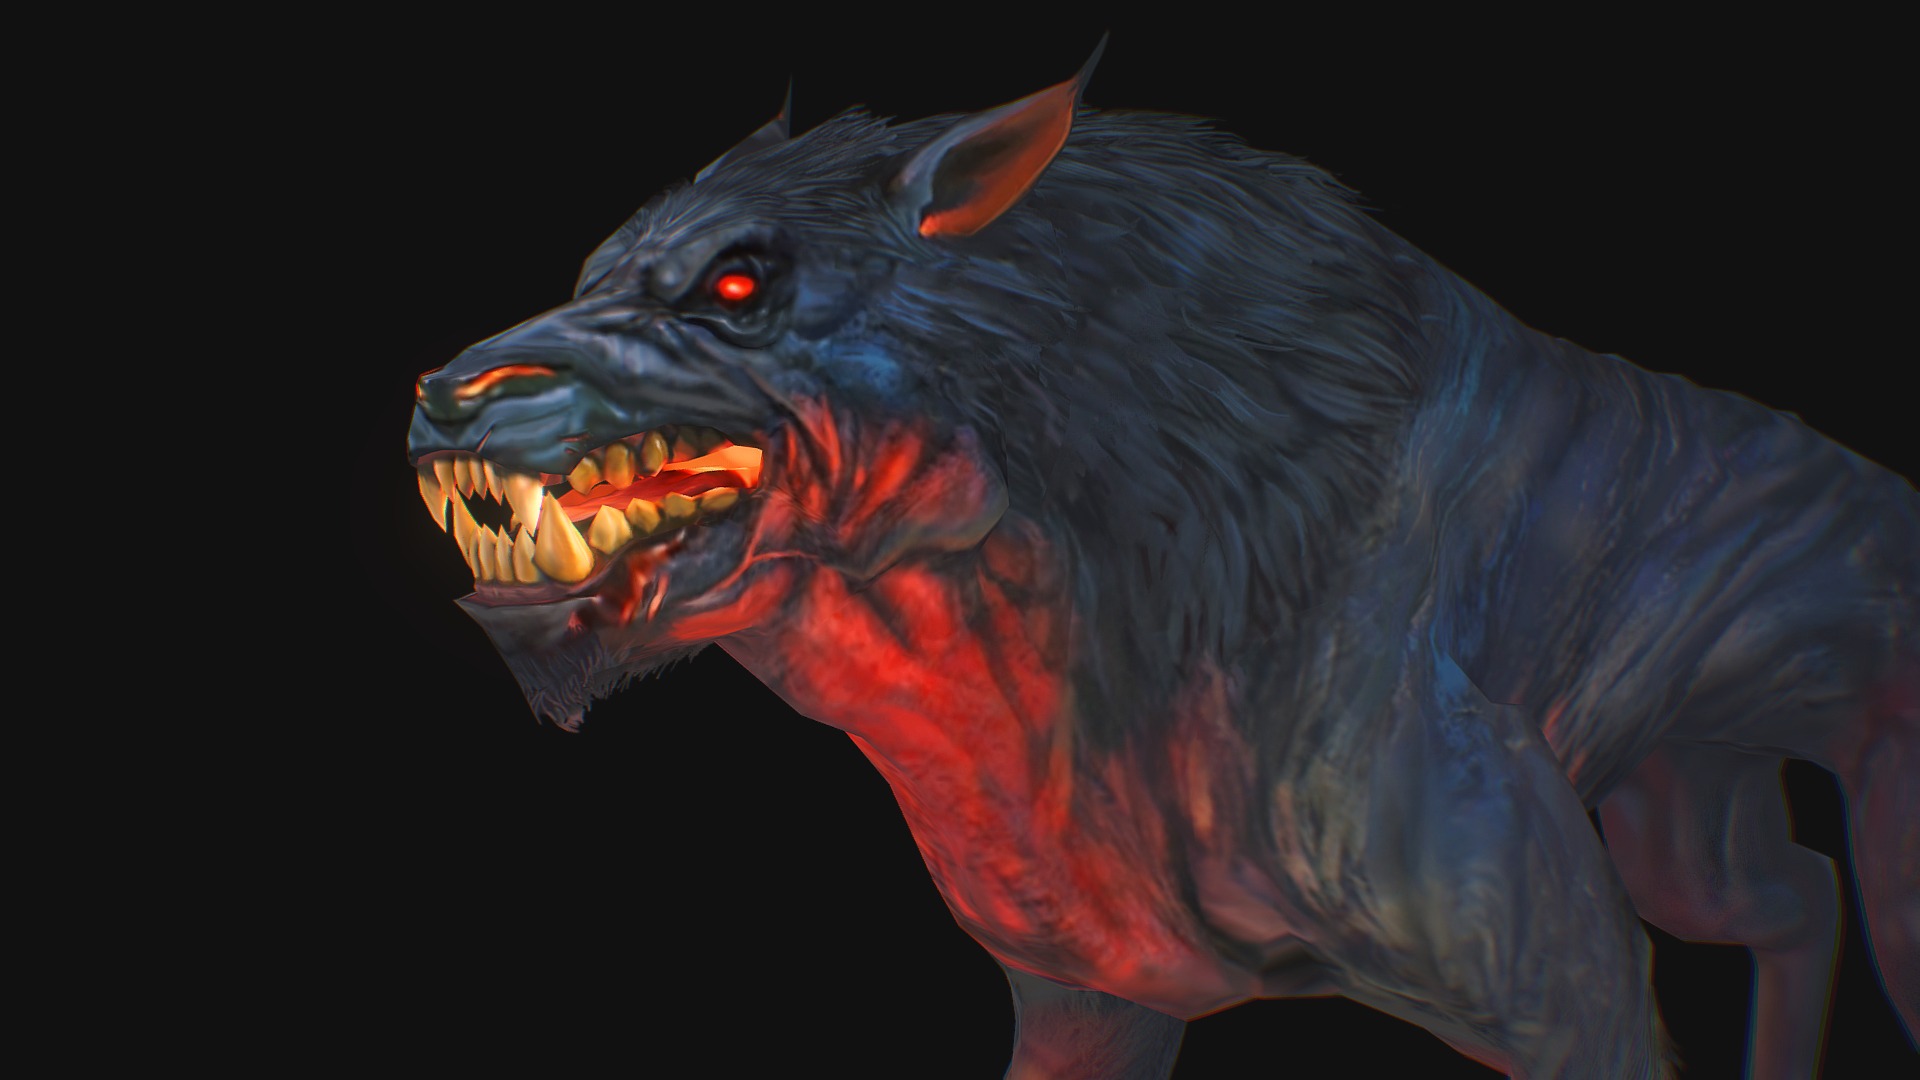 Complete Post Here :D https://www.artstation.com/artwork/PmnWP1
I´m a big fan of dungeons and dragons, so I wanted to model one of my favorite creatures, The Hell Hound. Is based on the original Hell Hound ilustration from the &ldquo;D&amp;D 5e Monster Manual